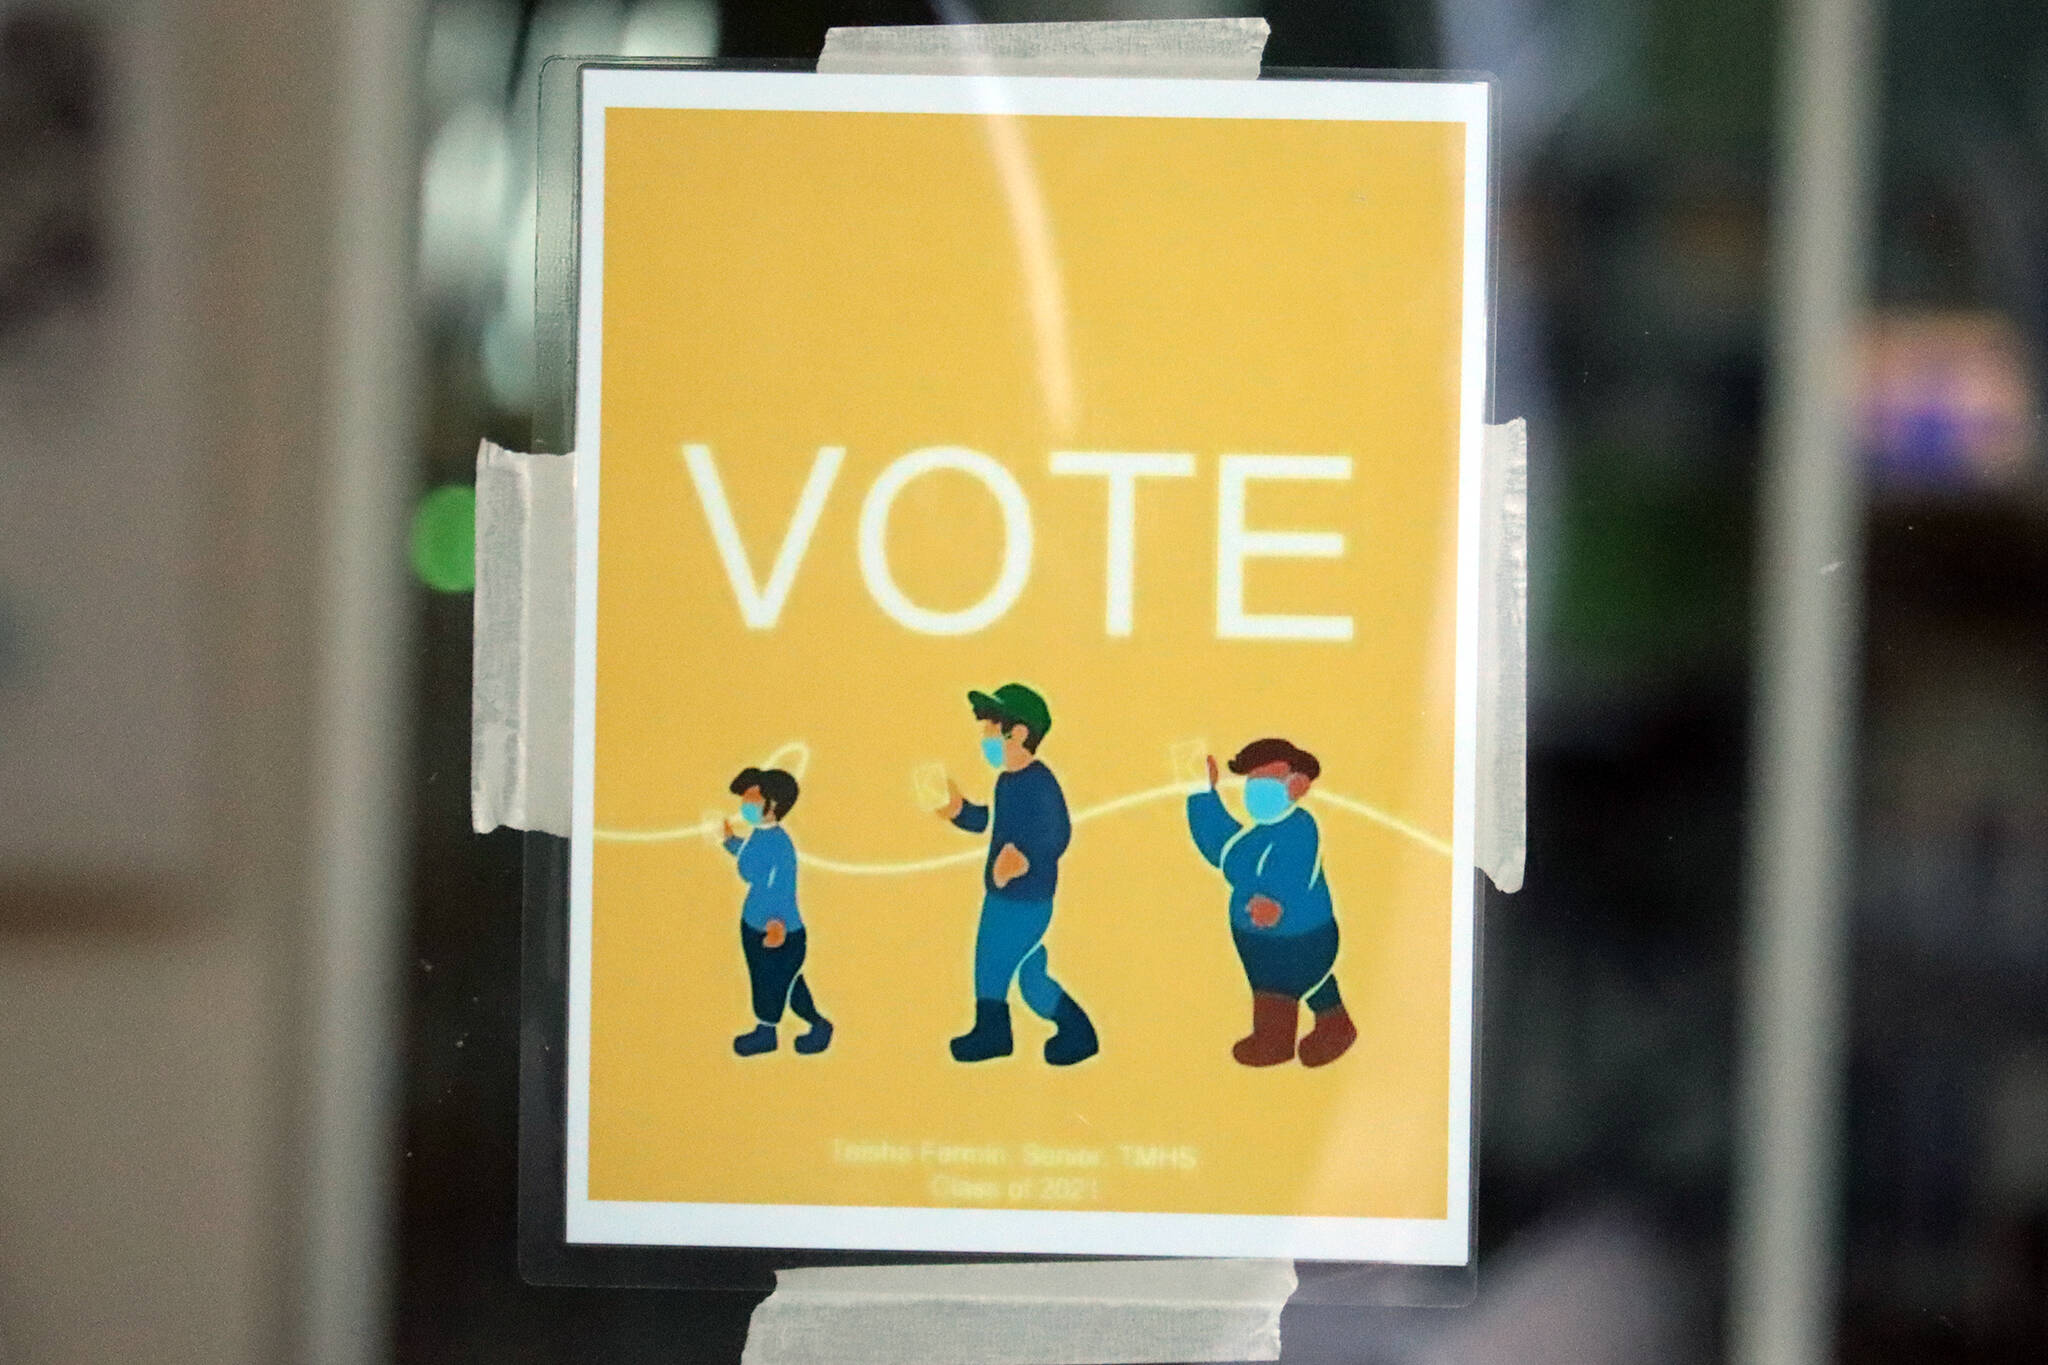 A sign designates a vote center during the recent municipal election. The center offered a spot for voters to drop off ballots or fill a ballot out in person. (Ben Hohenstatt / Juneau Empire File)